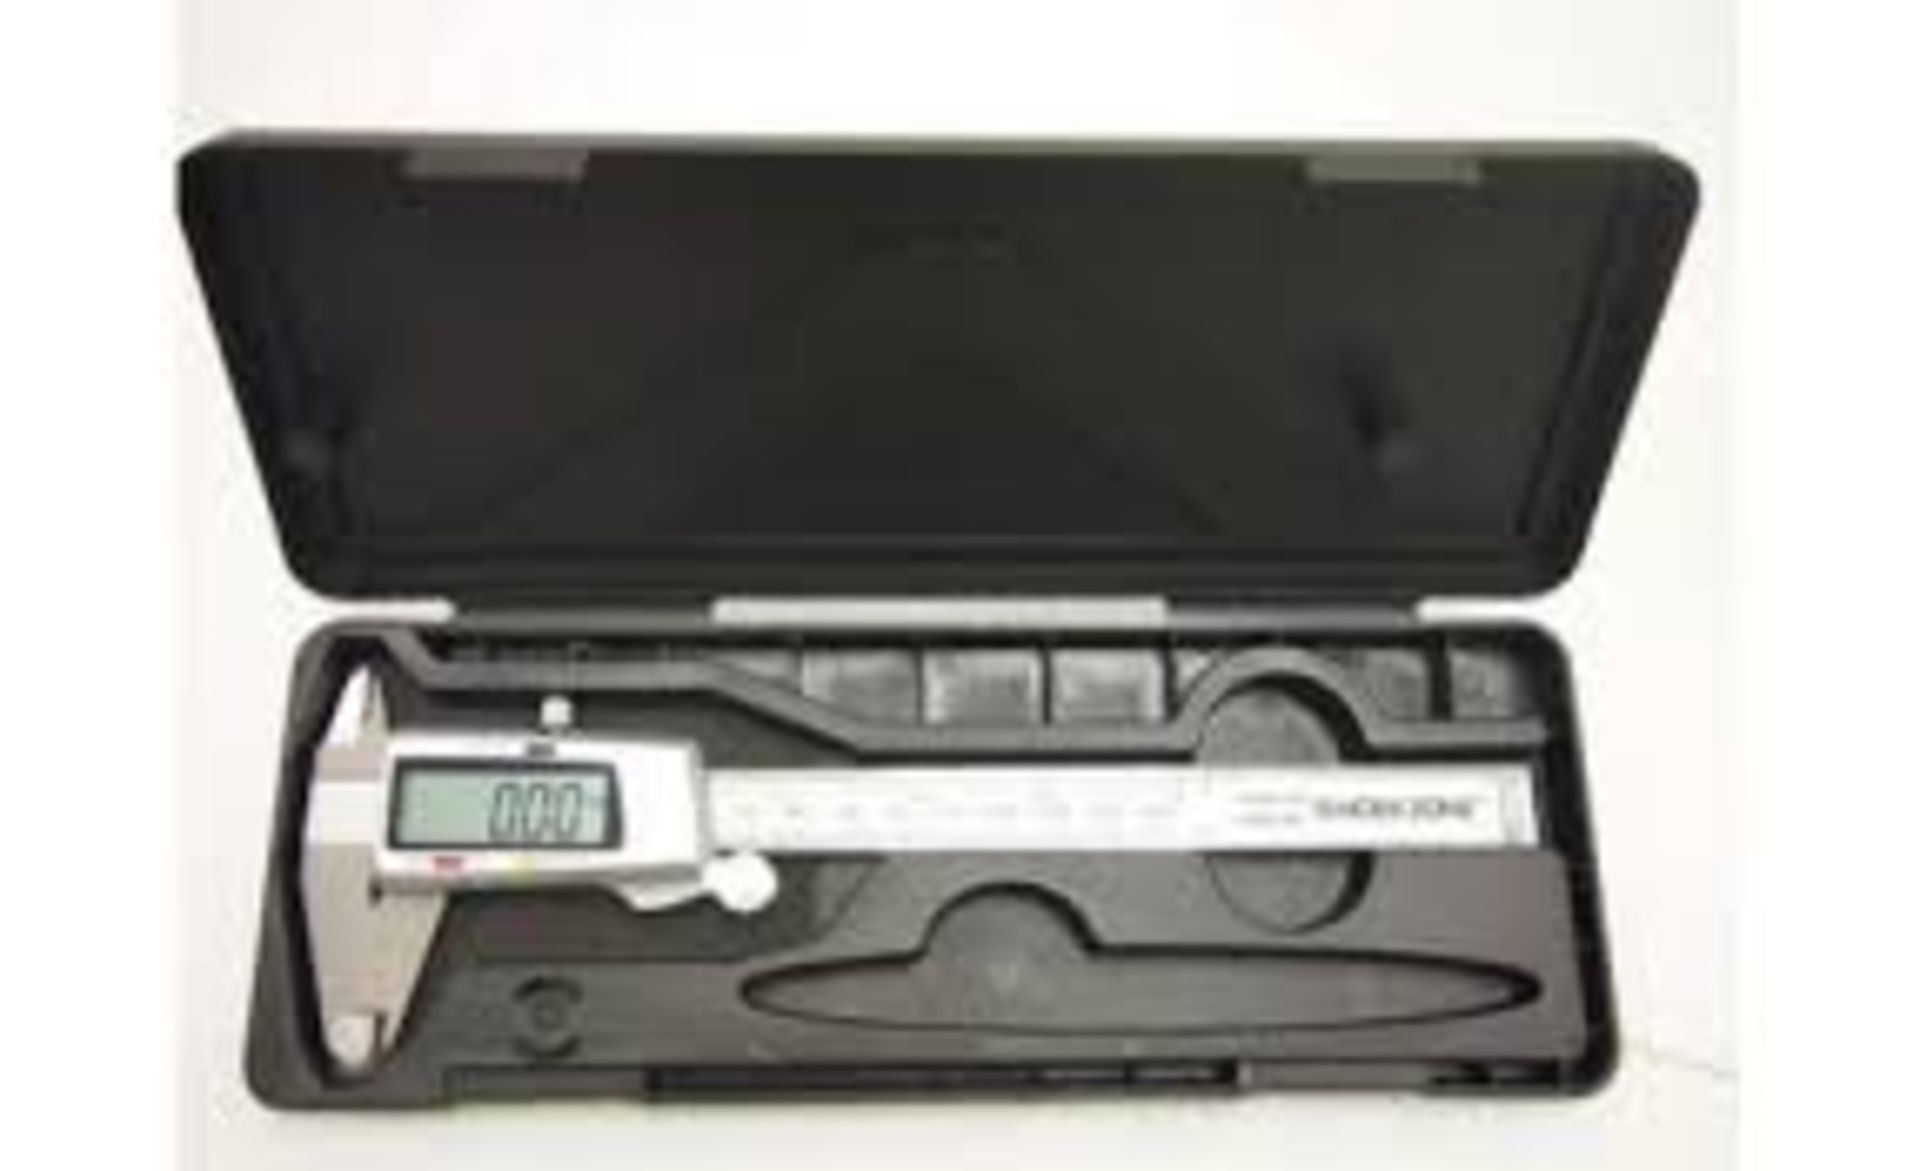 V Brand New Work Zone Digital Caliper Gauge X 2 YOUR BID PRICE TO BE MULTIPLIED BY TWO